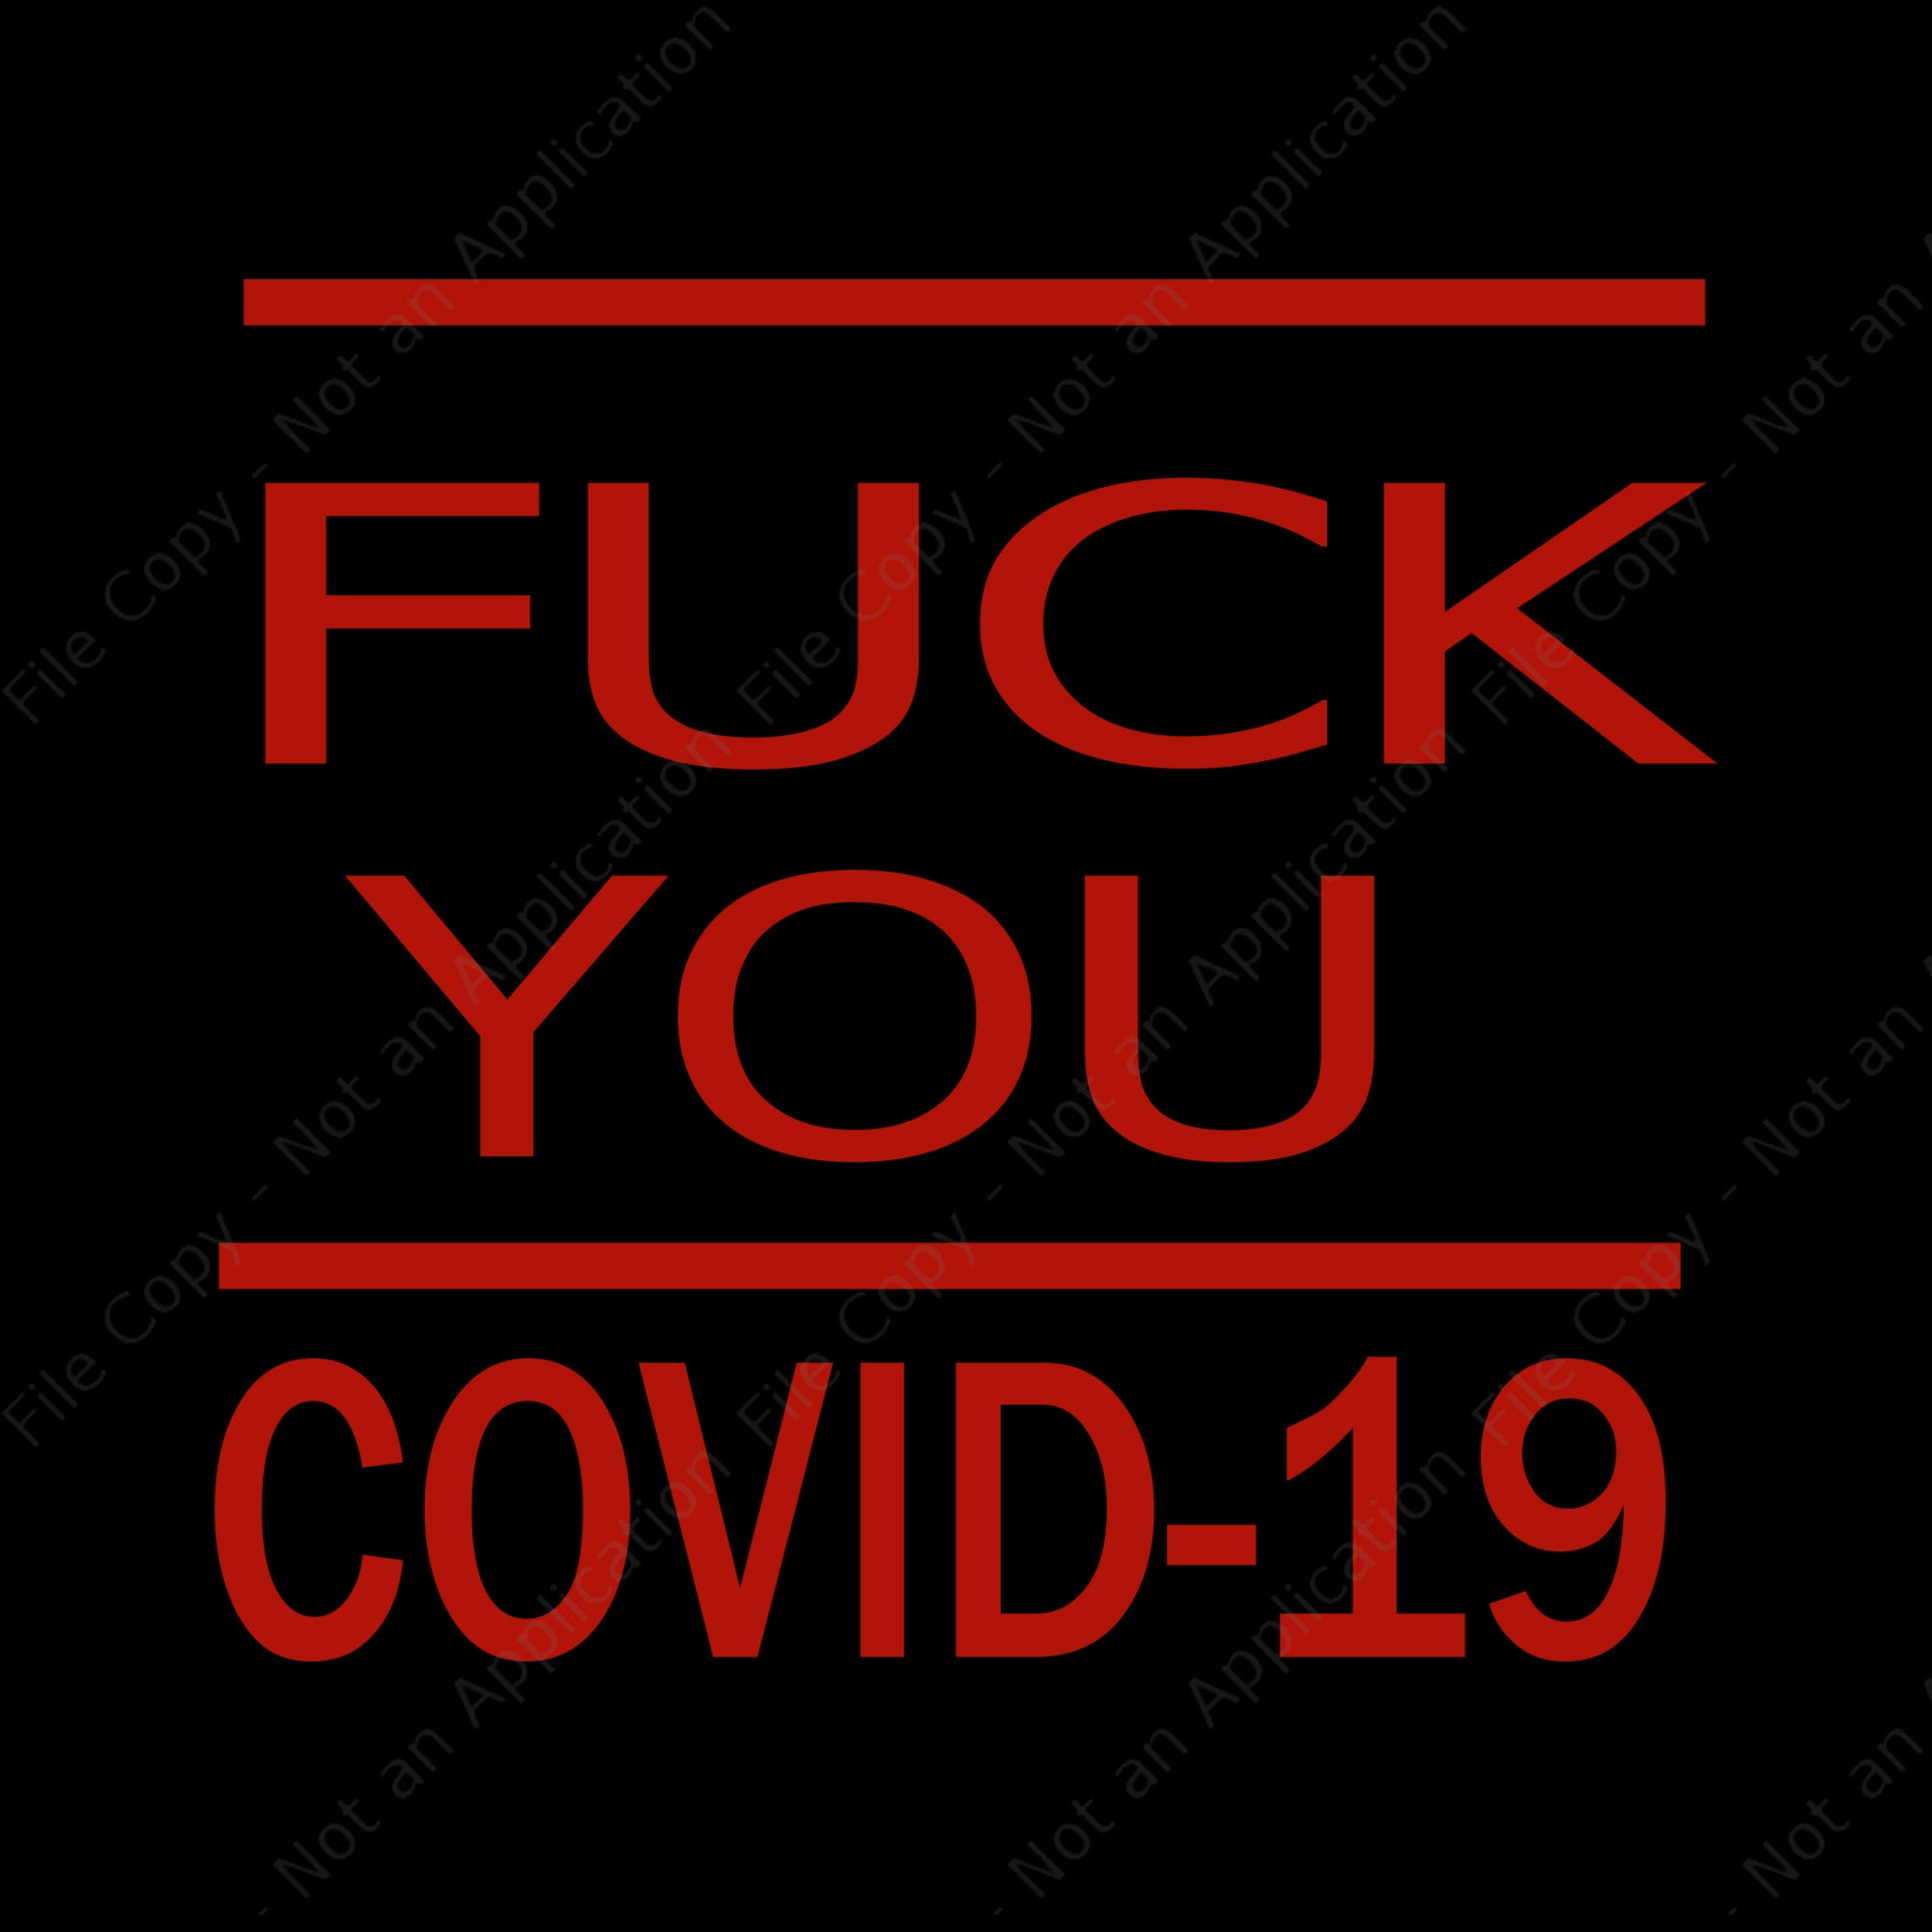 Fuck you covid-19 svg, fuck you covid-19, fuck you covid-19 png, covid-19 vector, covid-19 eps, dxf file